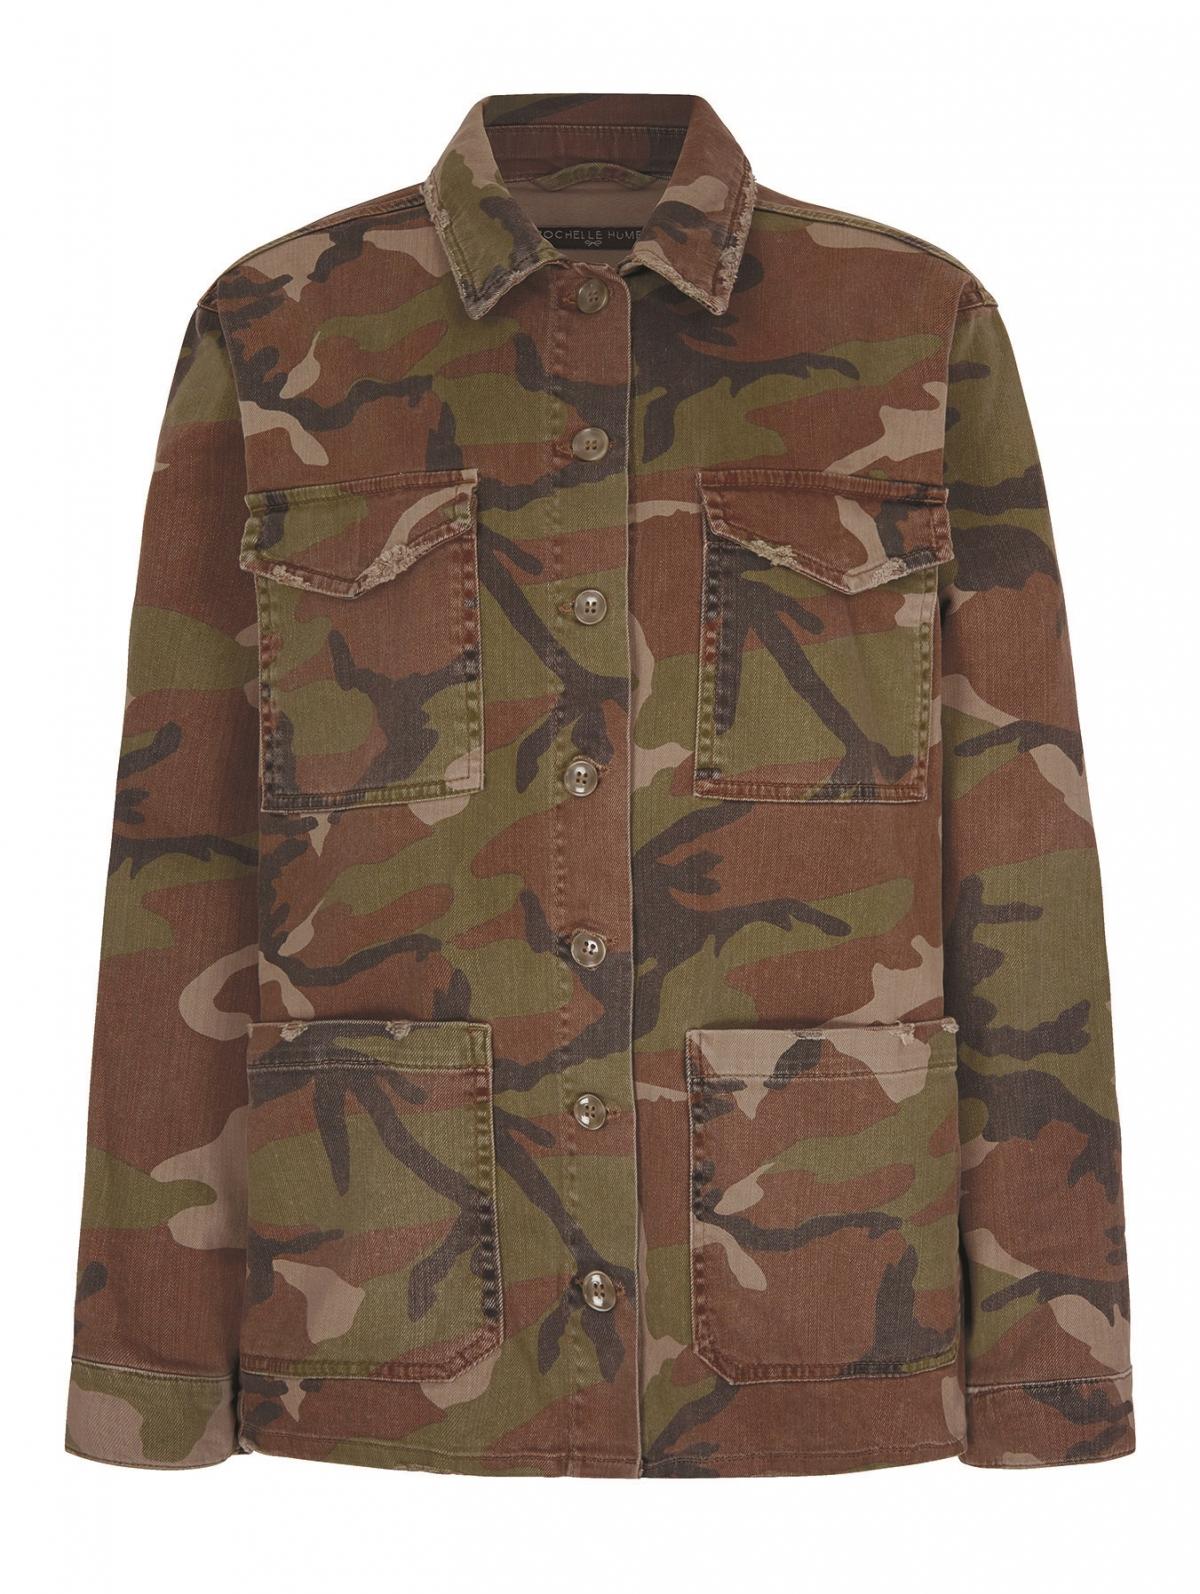 Very, Rochelle Humes Camo Jacket, £50